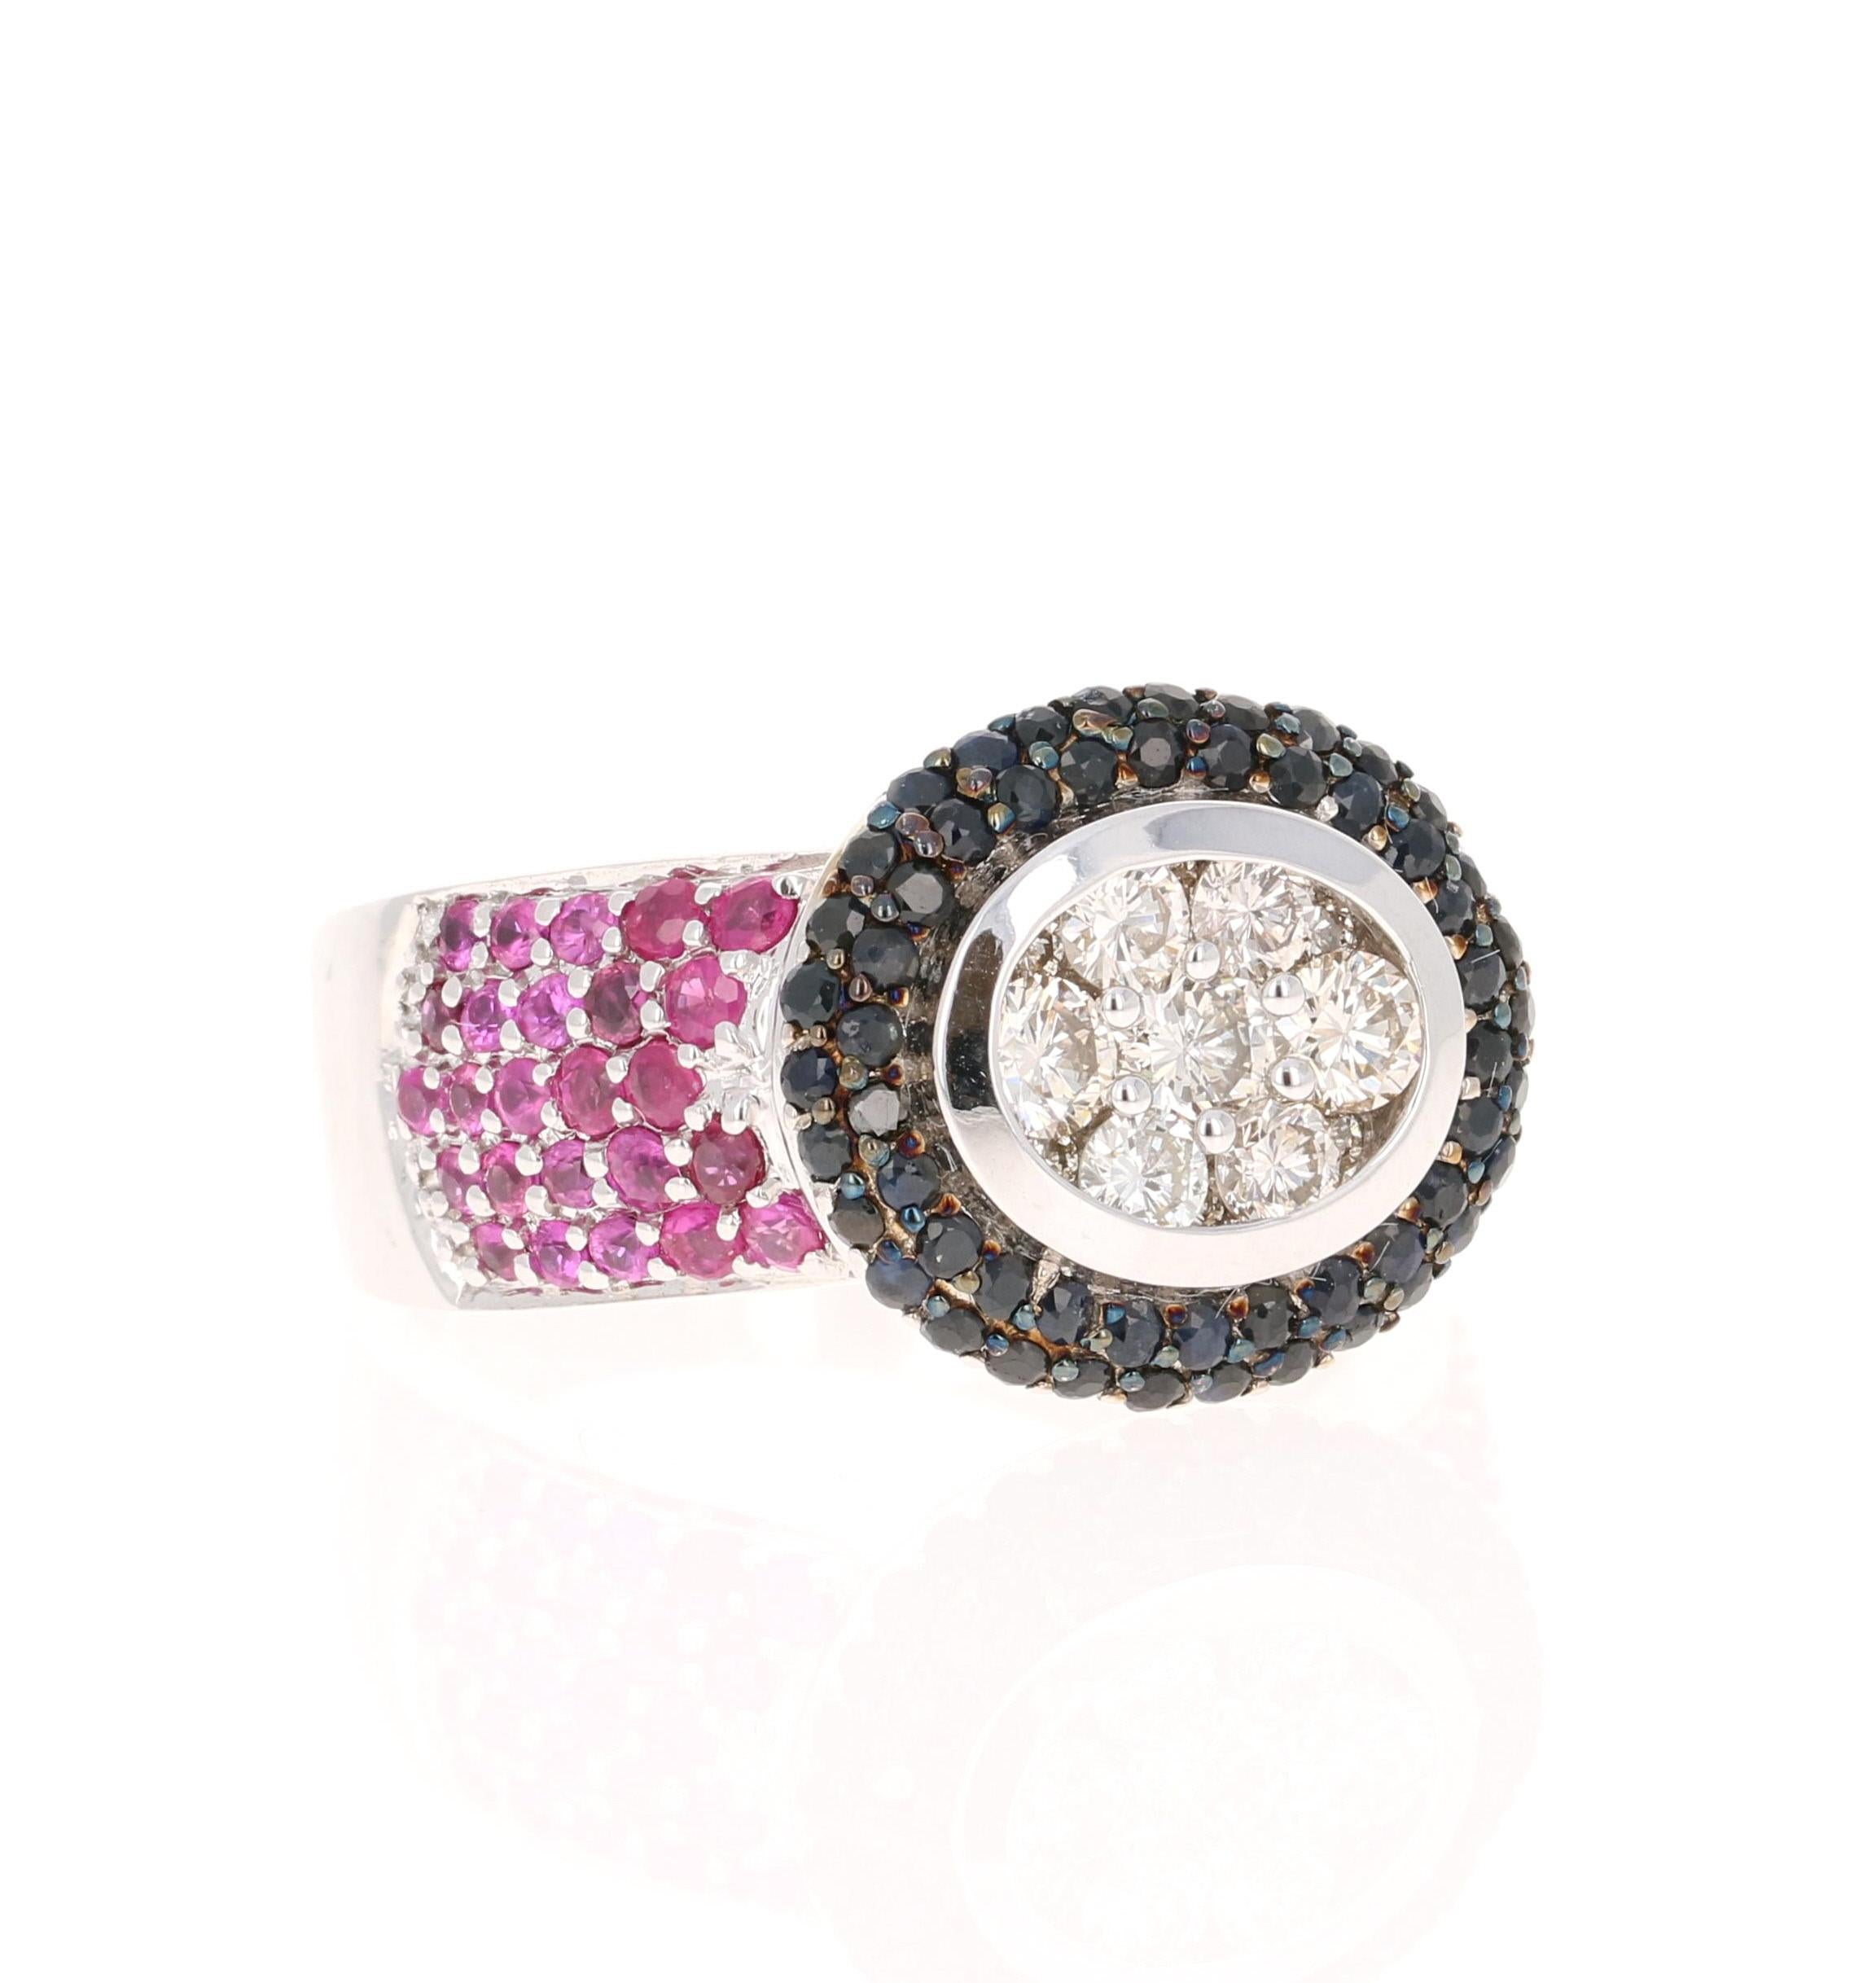 This ring has 7 Round Cut Diamonds that weigh 0.65 Carats (Clarity: VS, Color: H) and 60 Black Diamonds that weigh 0.85 Carats. Furthermore there are 50 Pink Sapphires that weigh 1.15 Carats. The total carat weight of the ring is 2.65 Carats. 

It